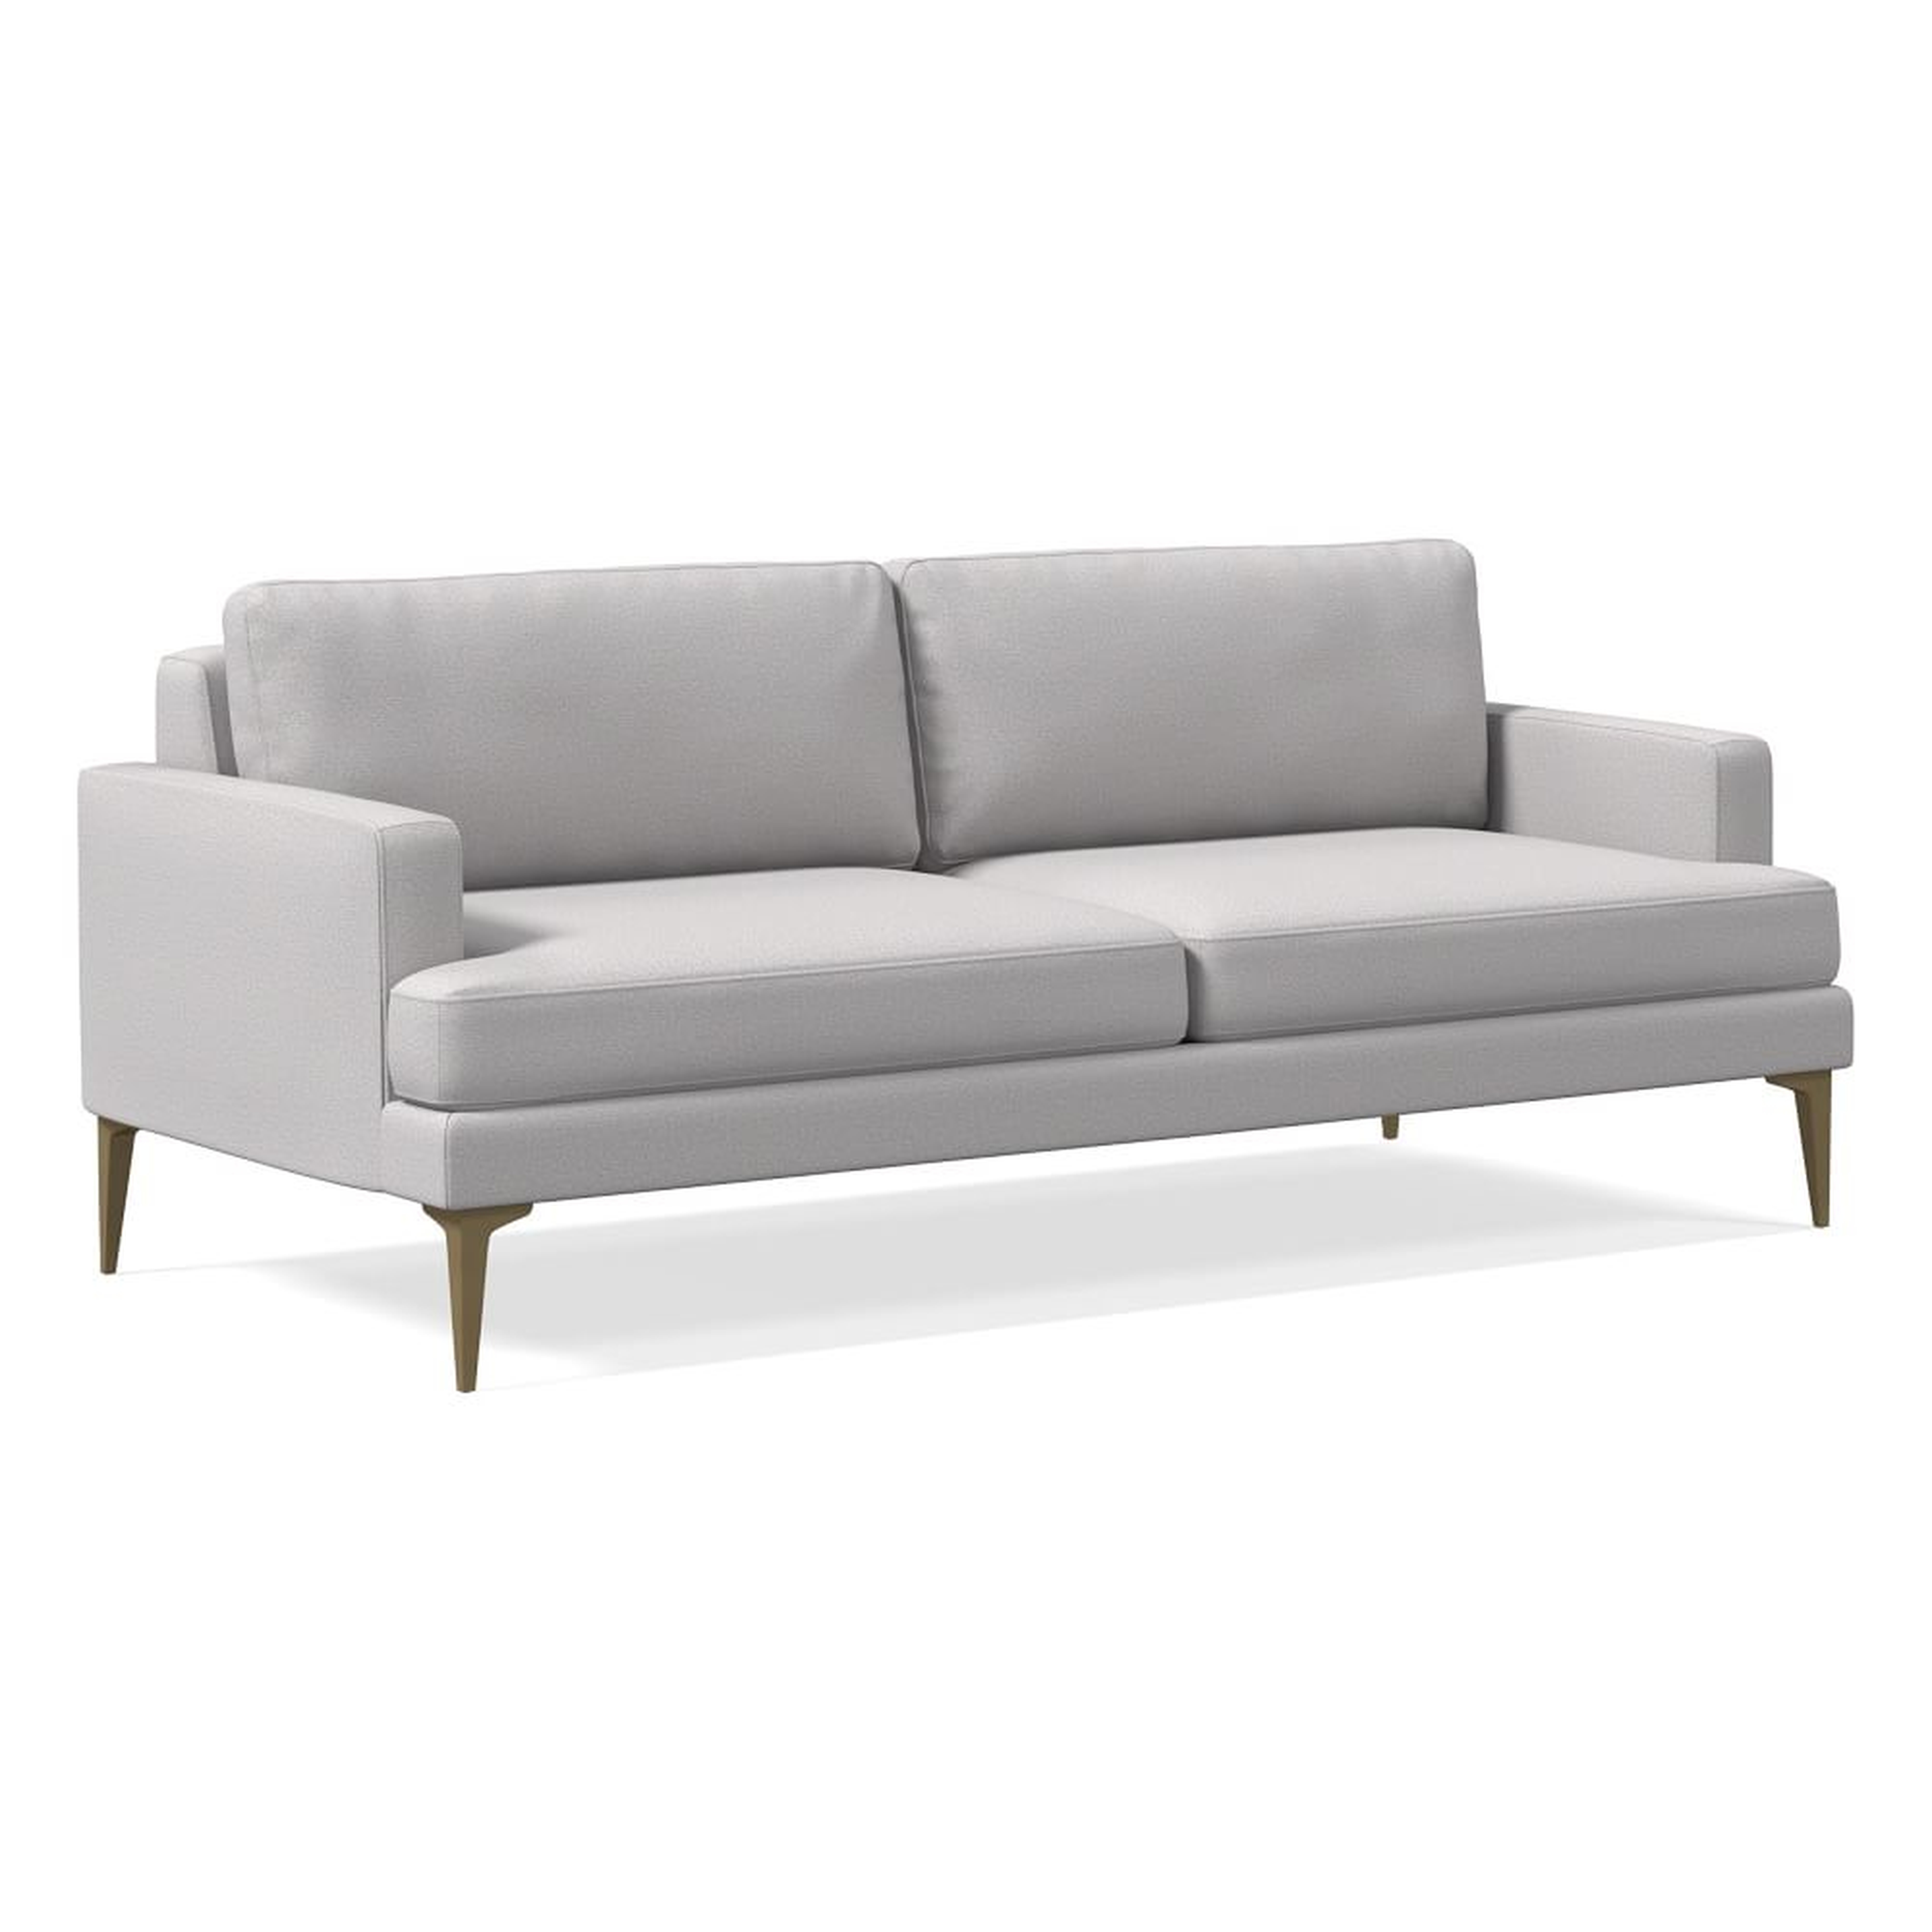 Andes 77" Multi-Seat Sofa, Petite Depth, Chenille Tweed, Frost Gray, Brass - West Elm